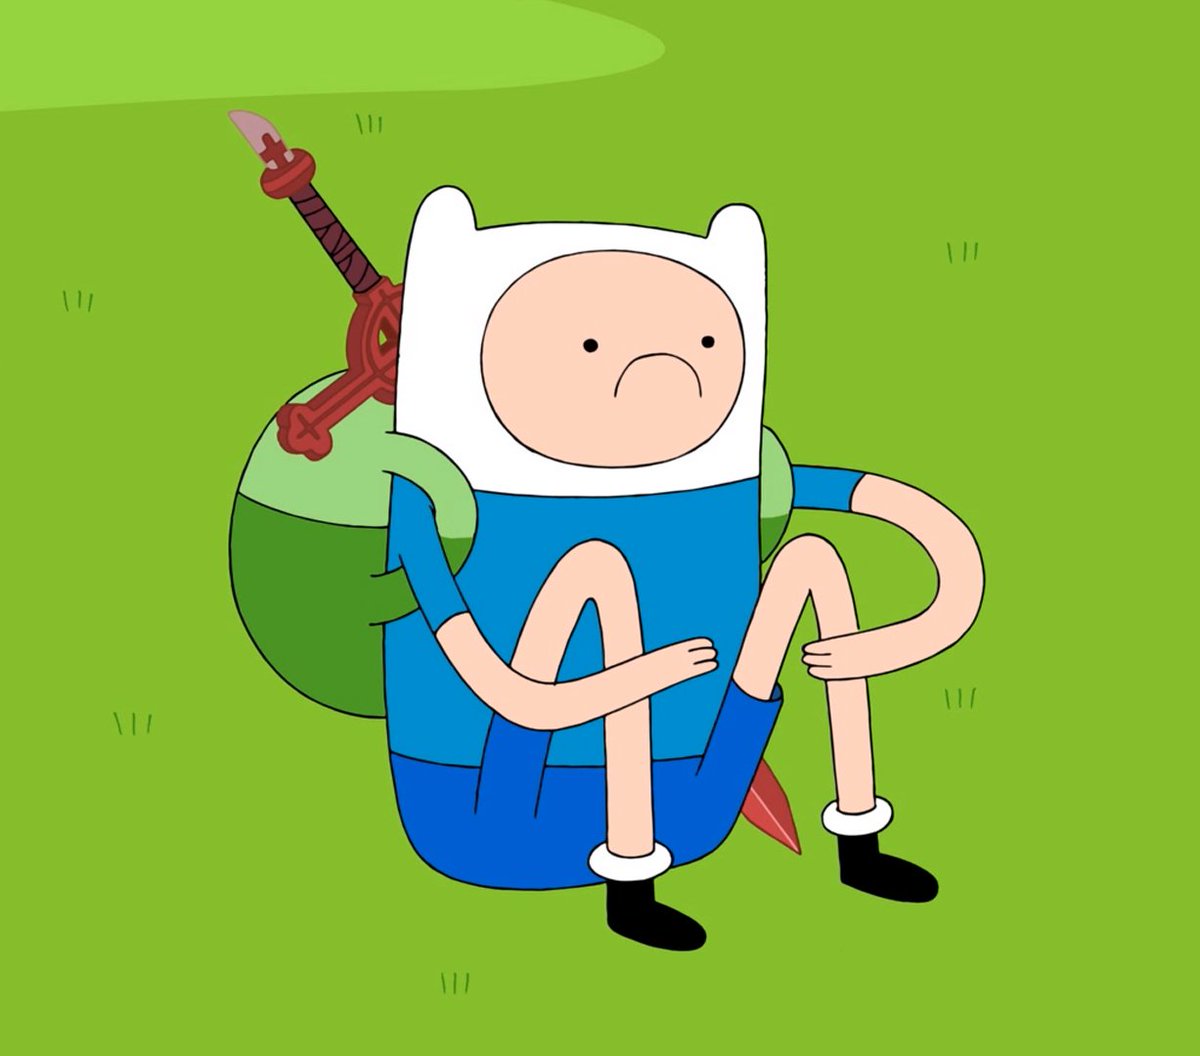 「i love it when finn goes :C」|adventure time momentsのイラスト